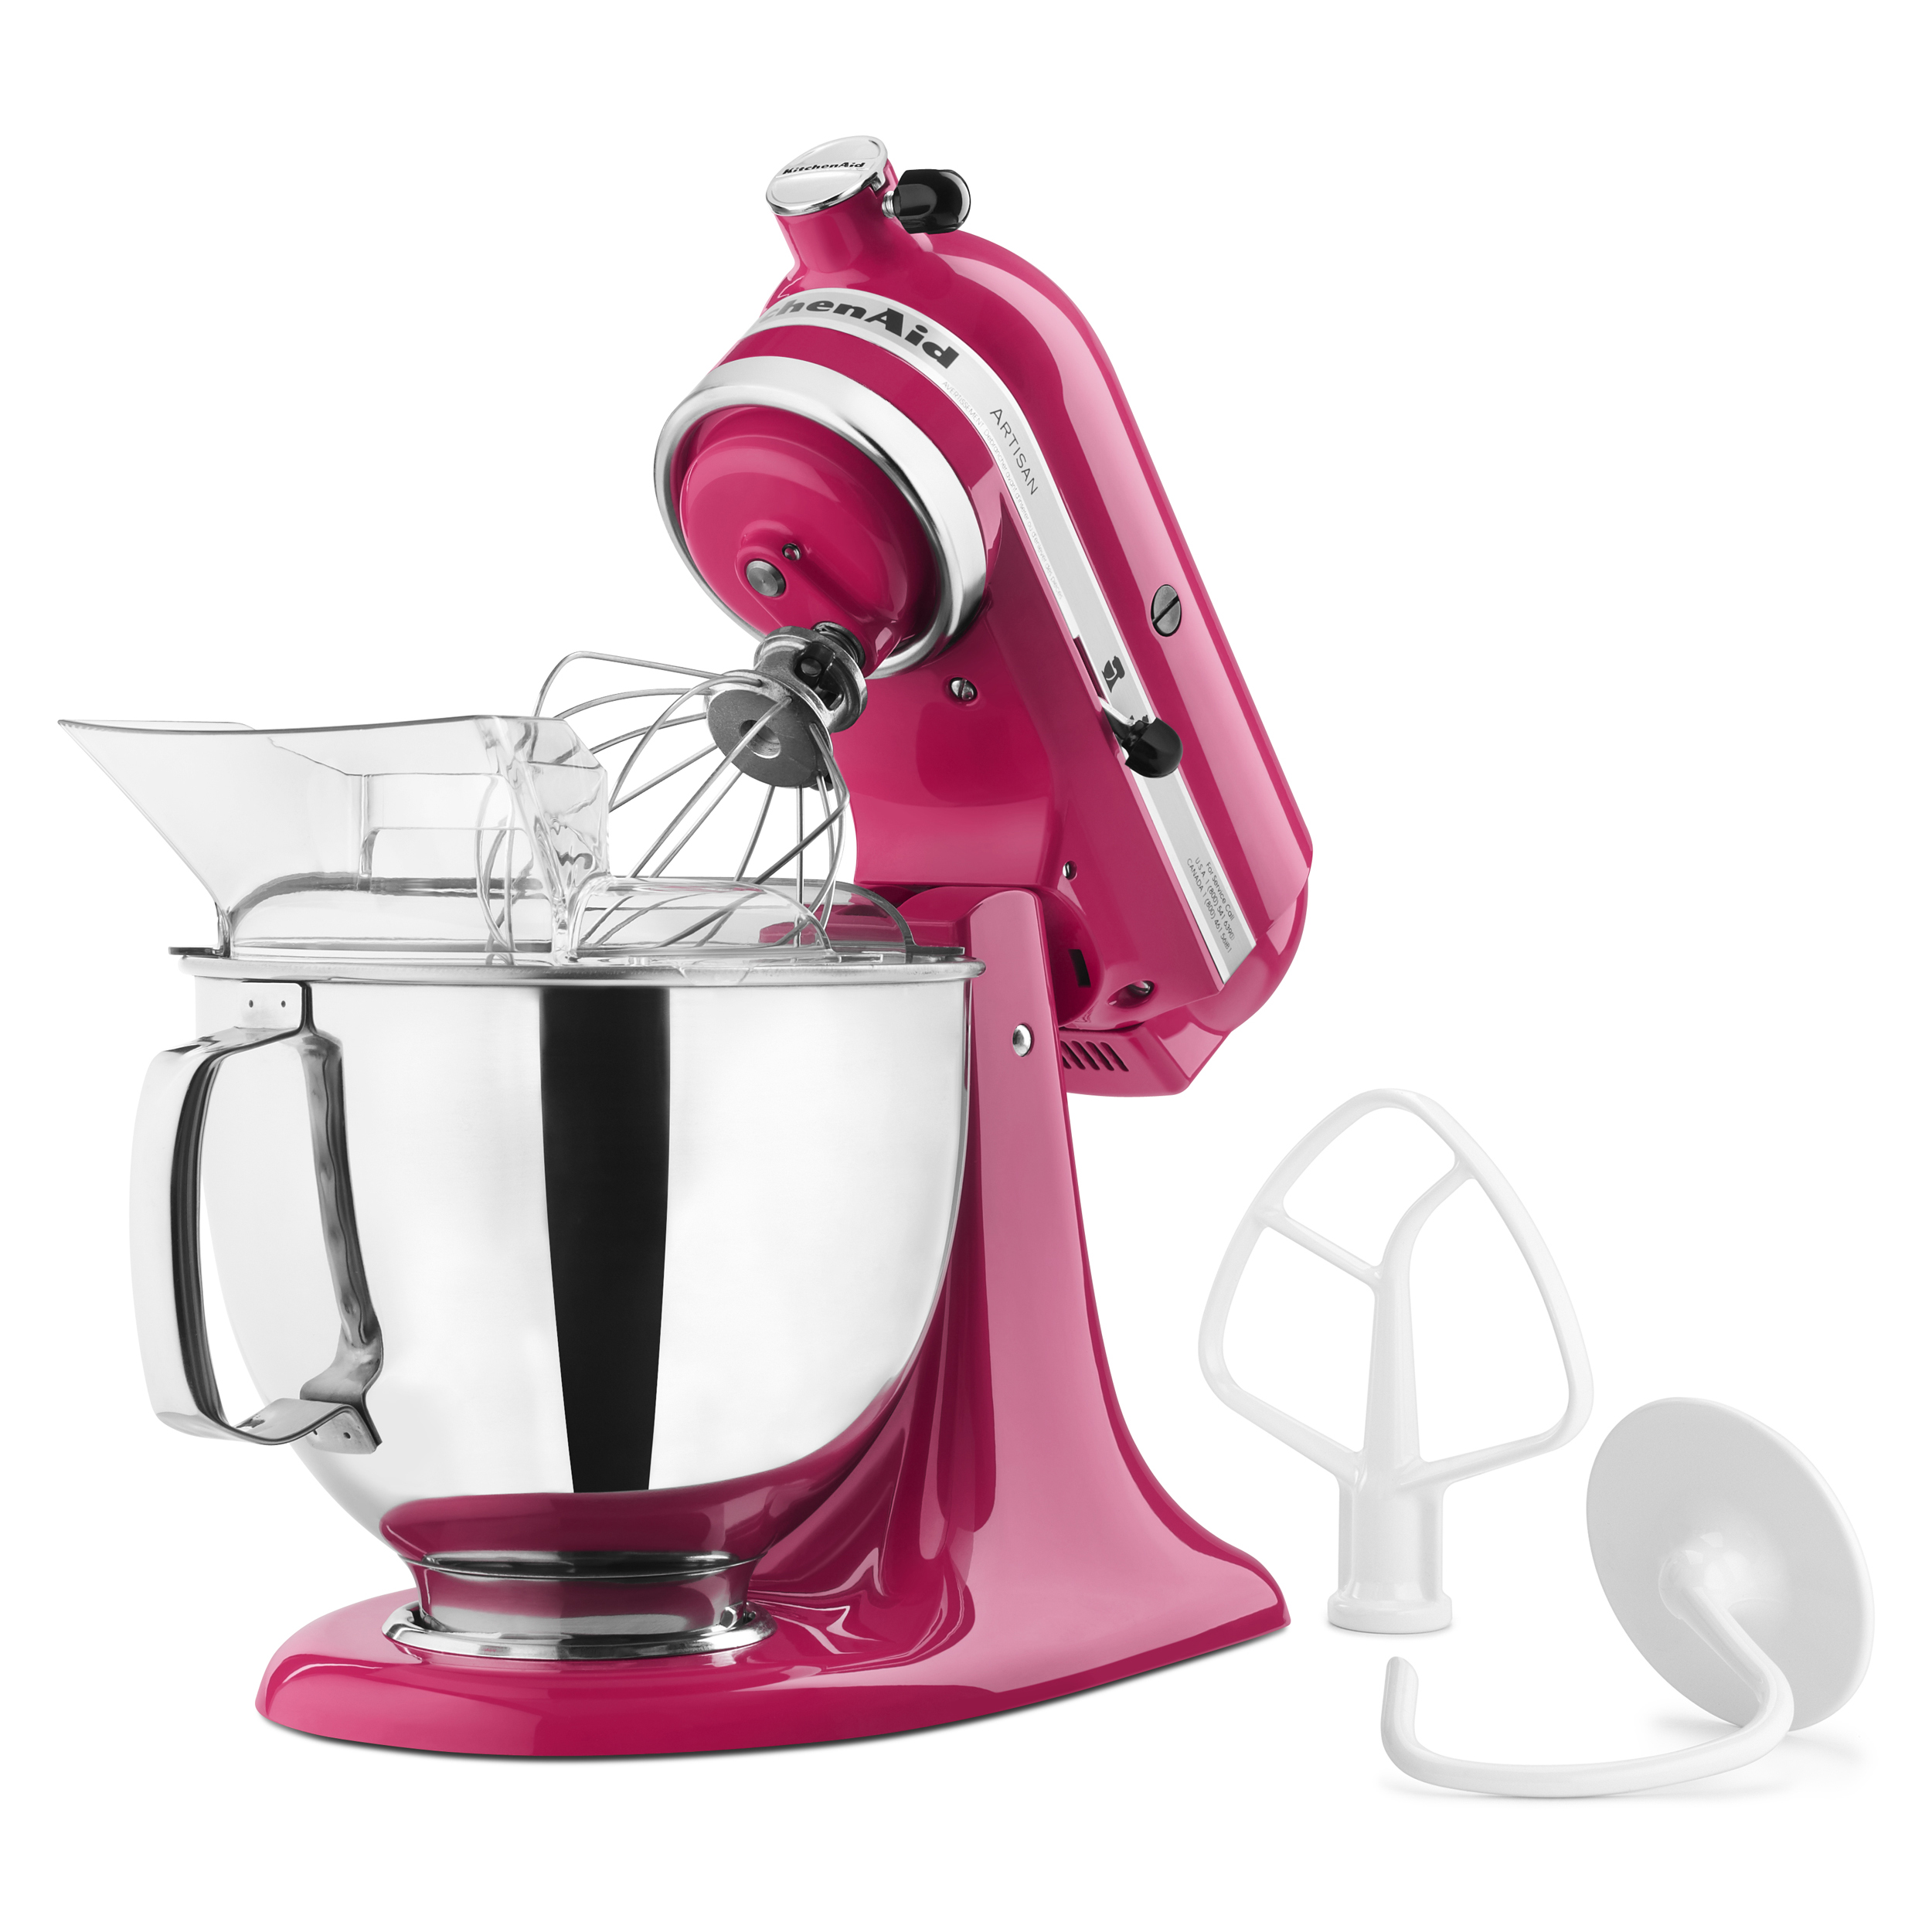 My New KitchenAid Stand Mixer! – Home Cooking Memories